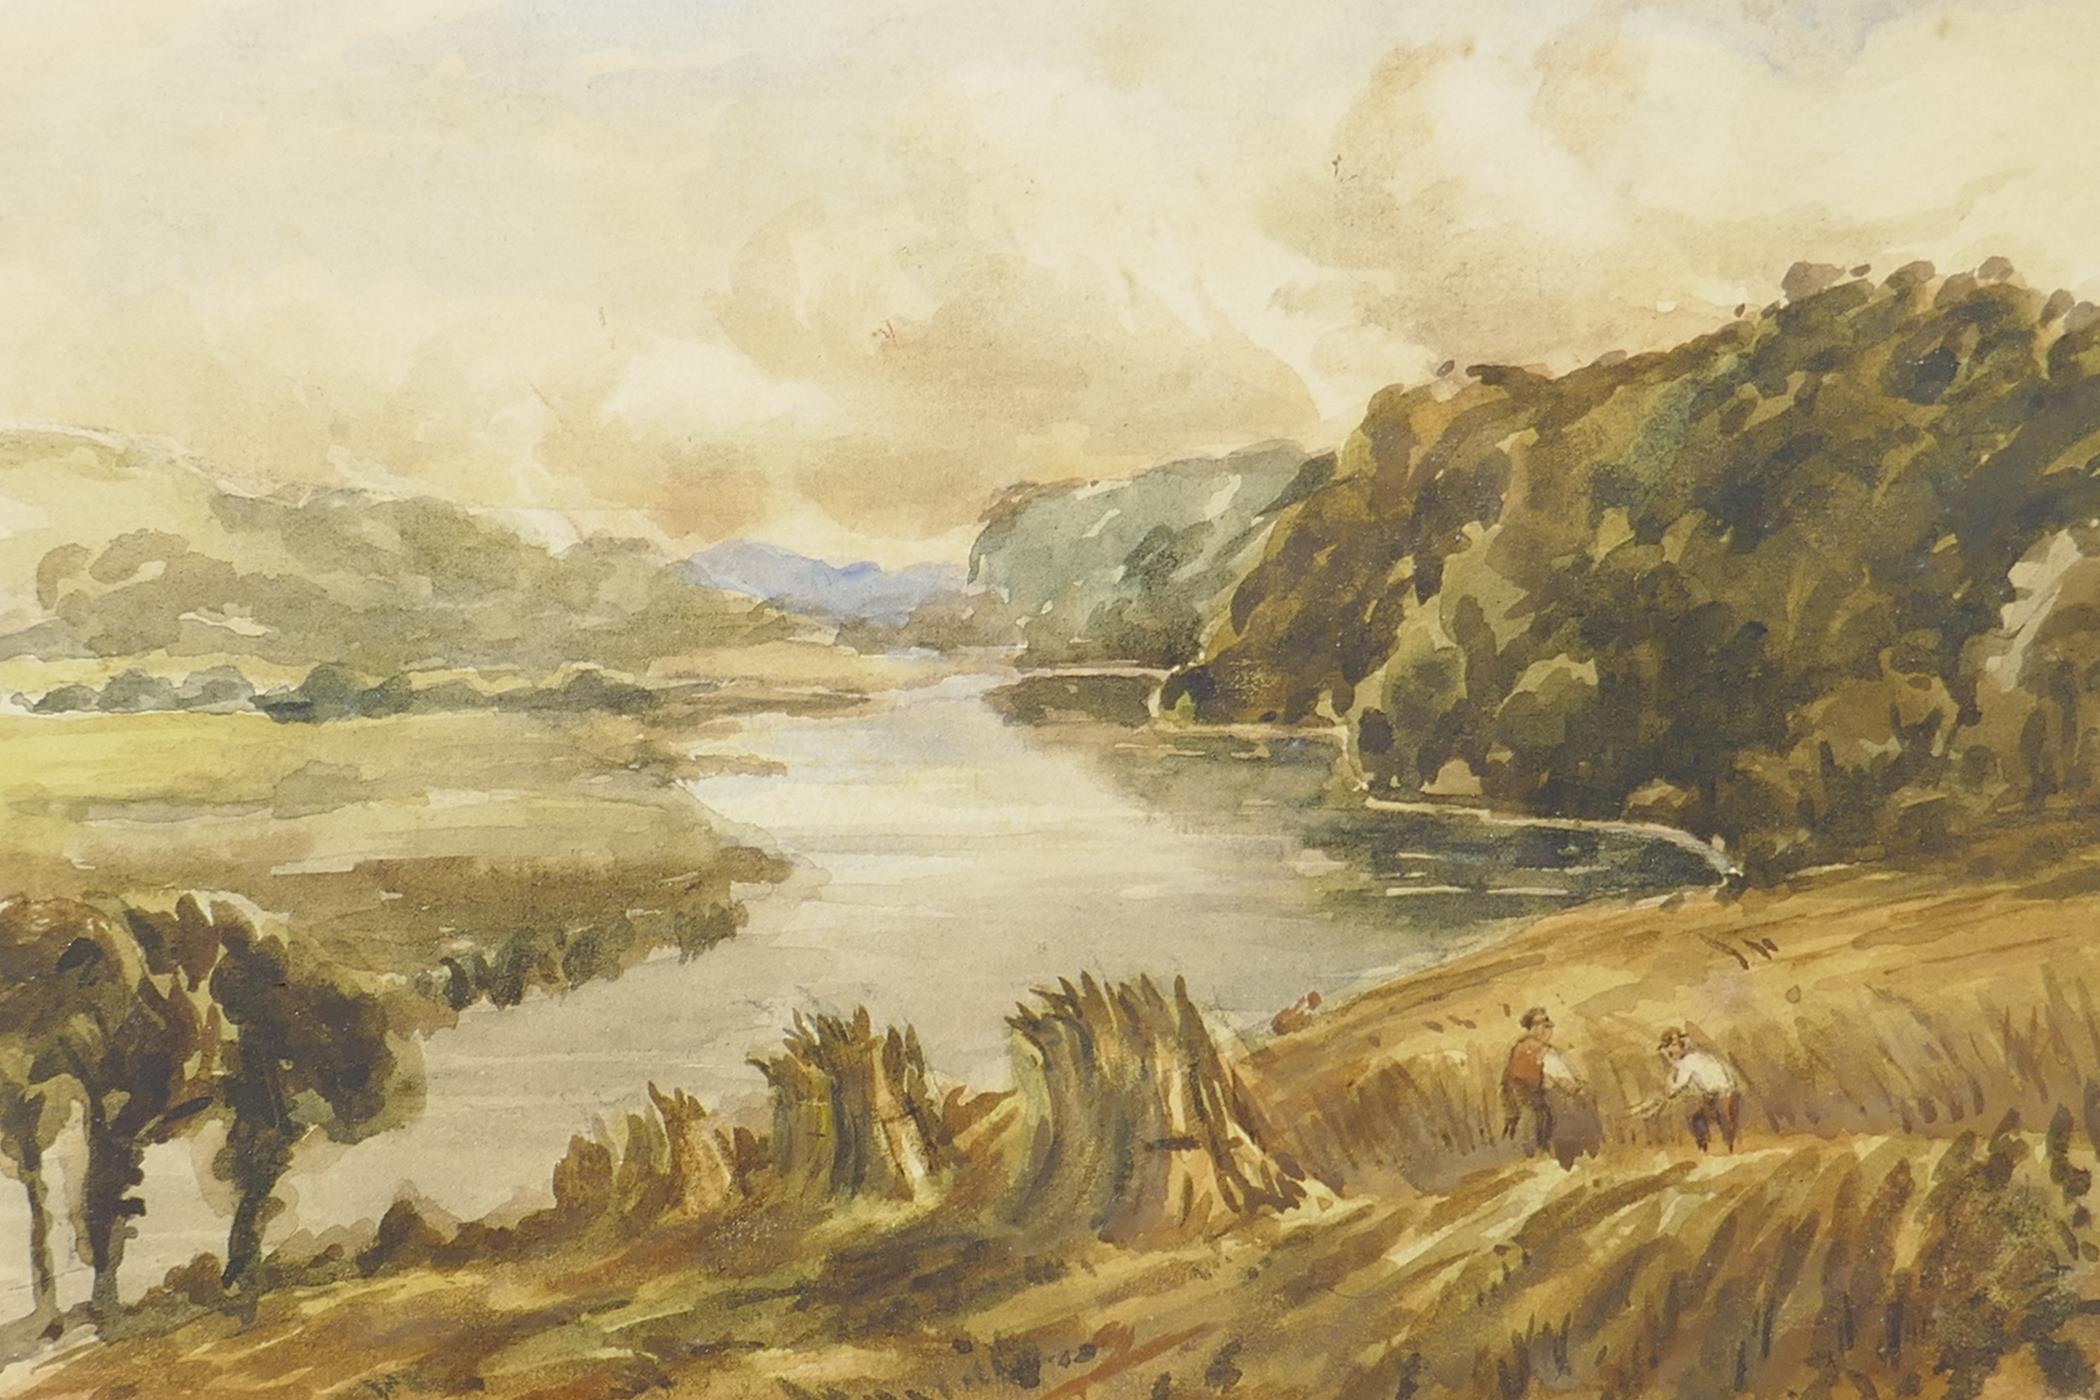 H.F. Marks, C19th watercolour riverside with figures harvesting corn, 9½" x 7", signed and dated